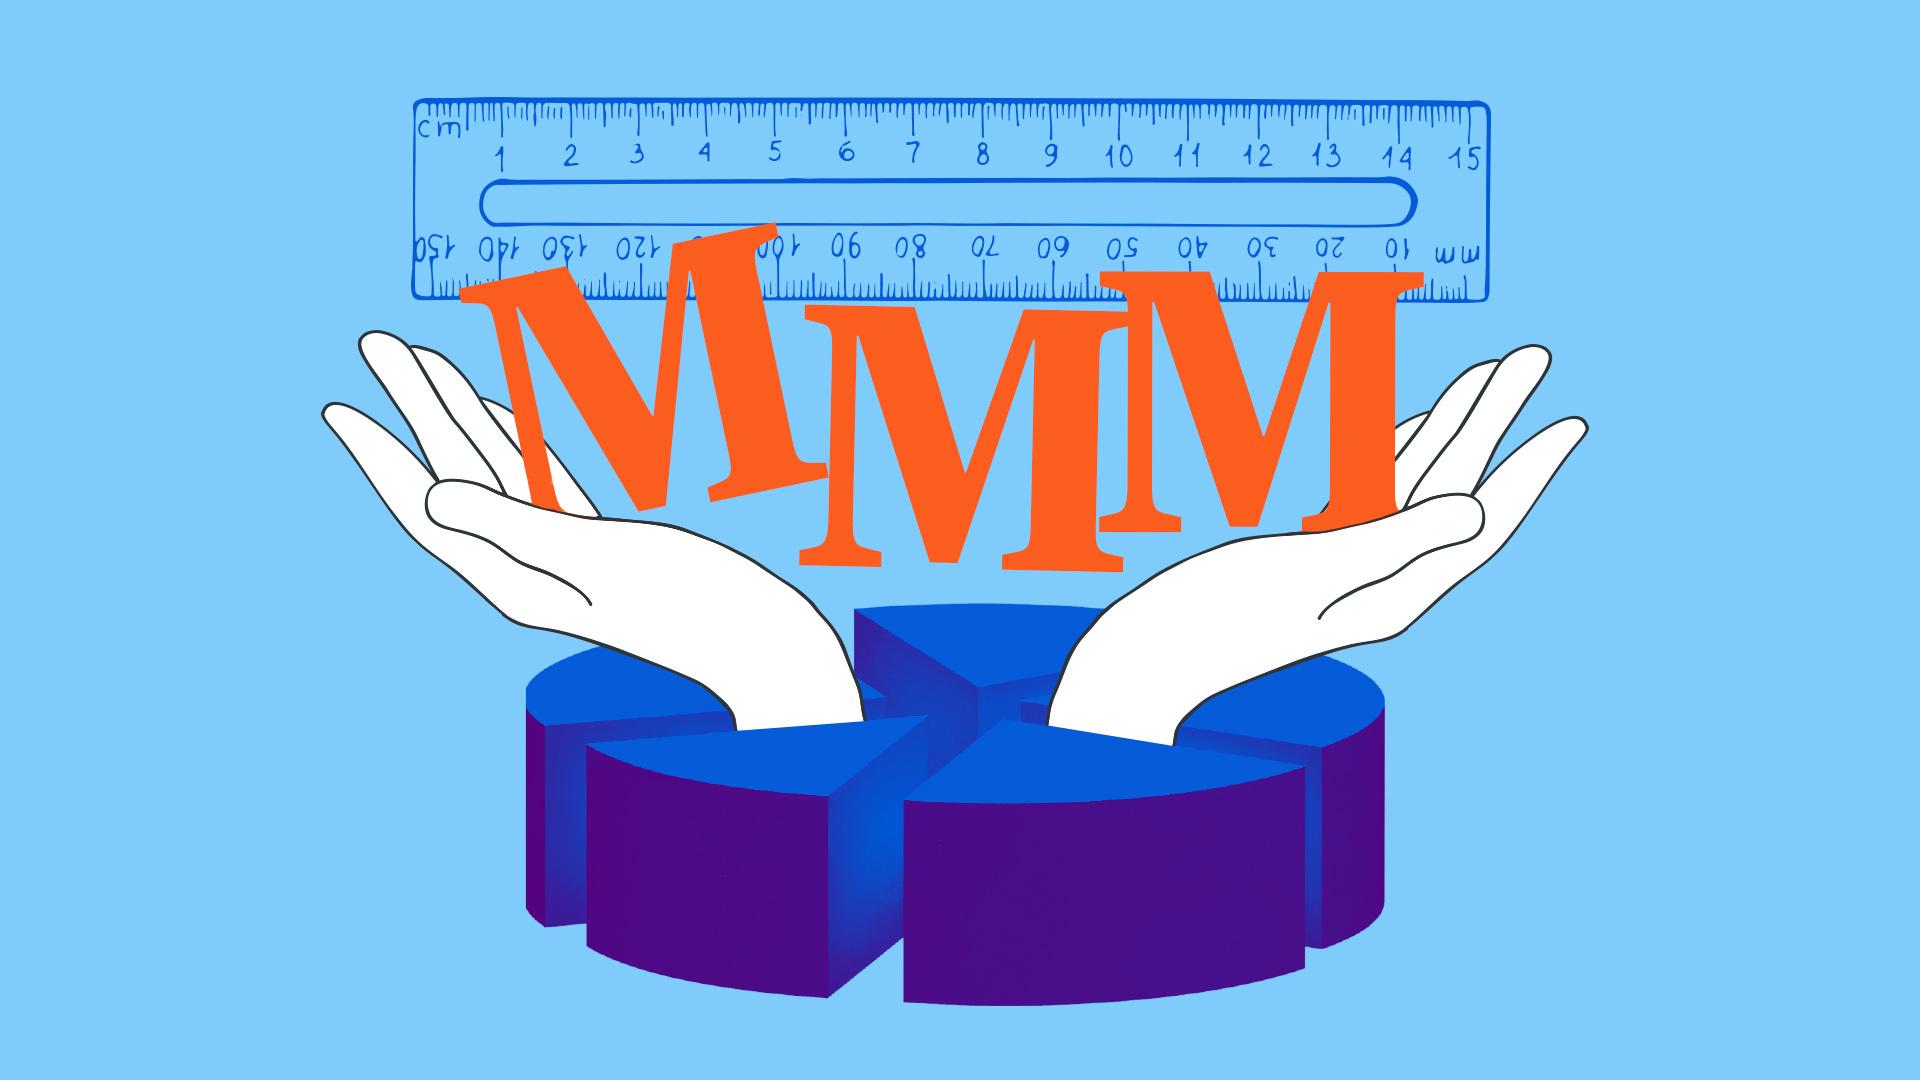 Graphic of hands lifting up the letters "MMM" with a transparent ruler in the background